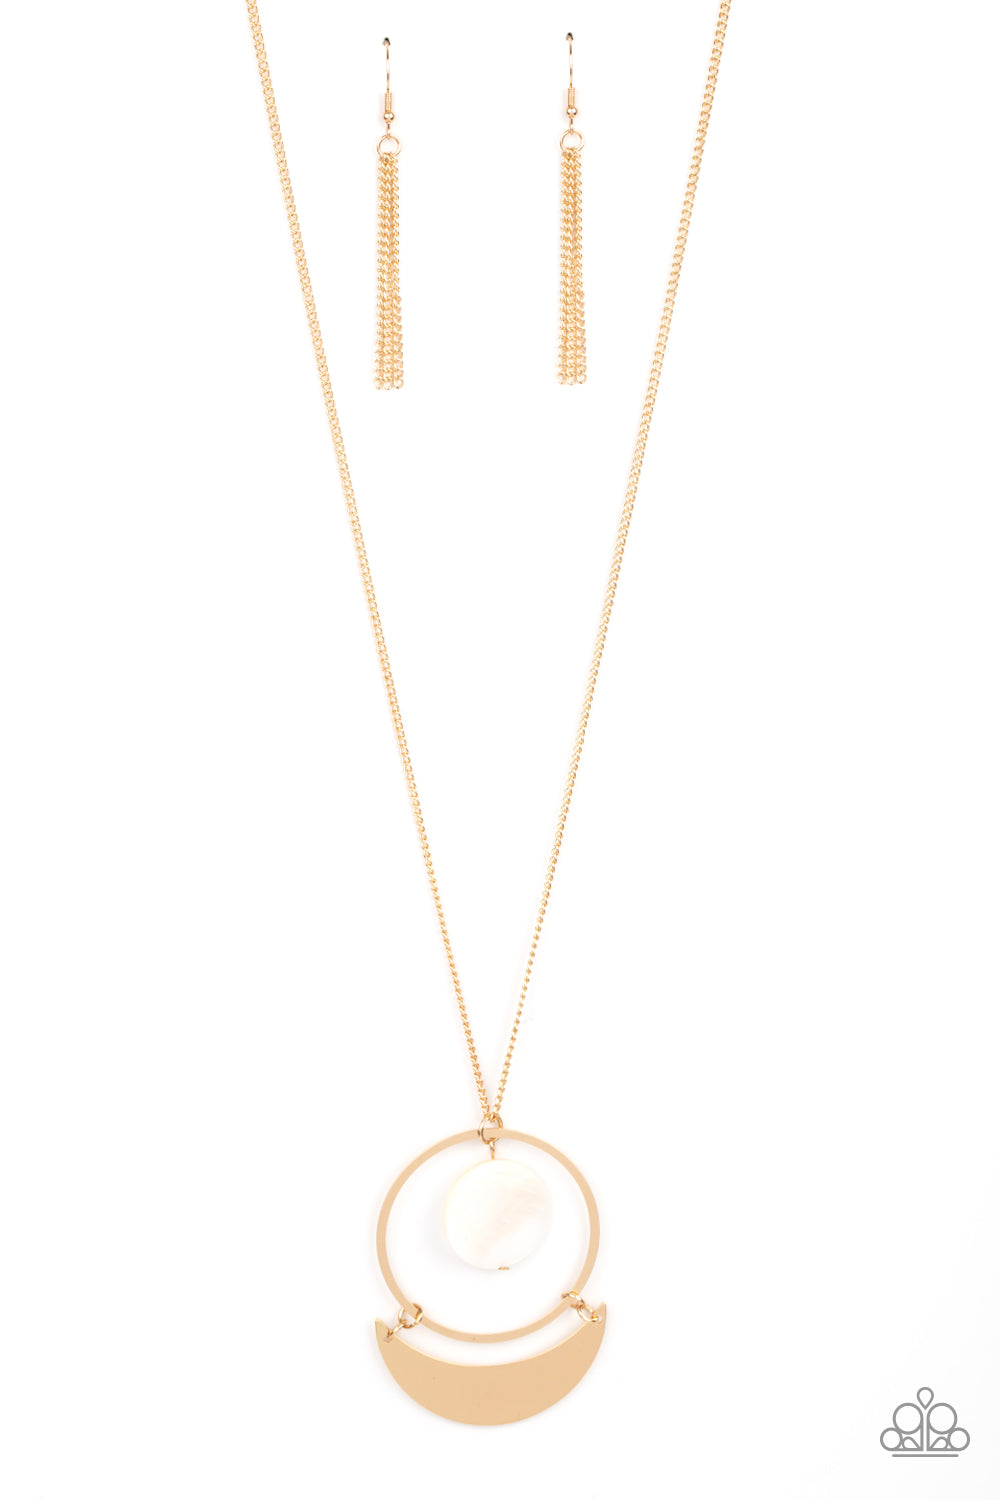 Moonlight Sailing Gold Necklace - Paparazzi Accessories. A white shell-like disc swings from the top of a flat gold hoop at the bottom of a lengthened gold chain. A flat gold crescent frame swings from the bottom of the display, creating a sleekly stacked pendant. Features an adjustable clasp closure.  All Paparazzi Accessories are lead free and nickel free!  Sold as one individual necklace. Includes one pair of matching earrings.